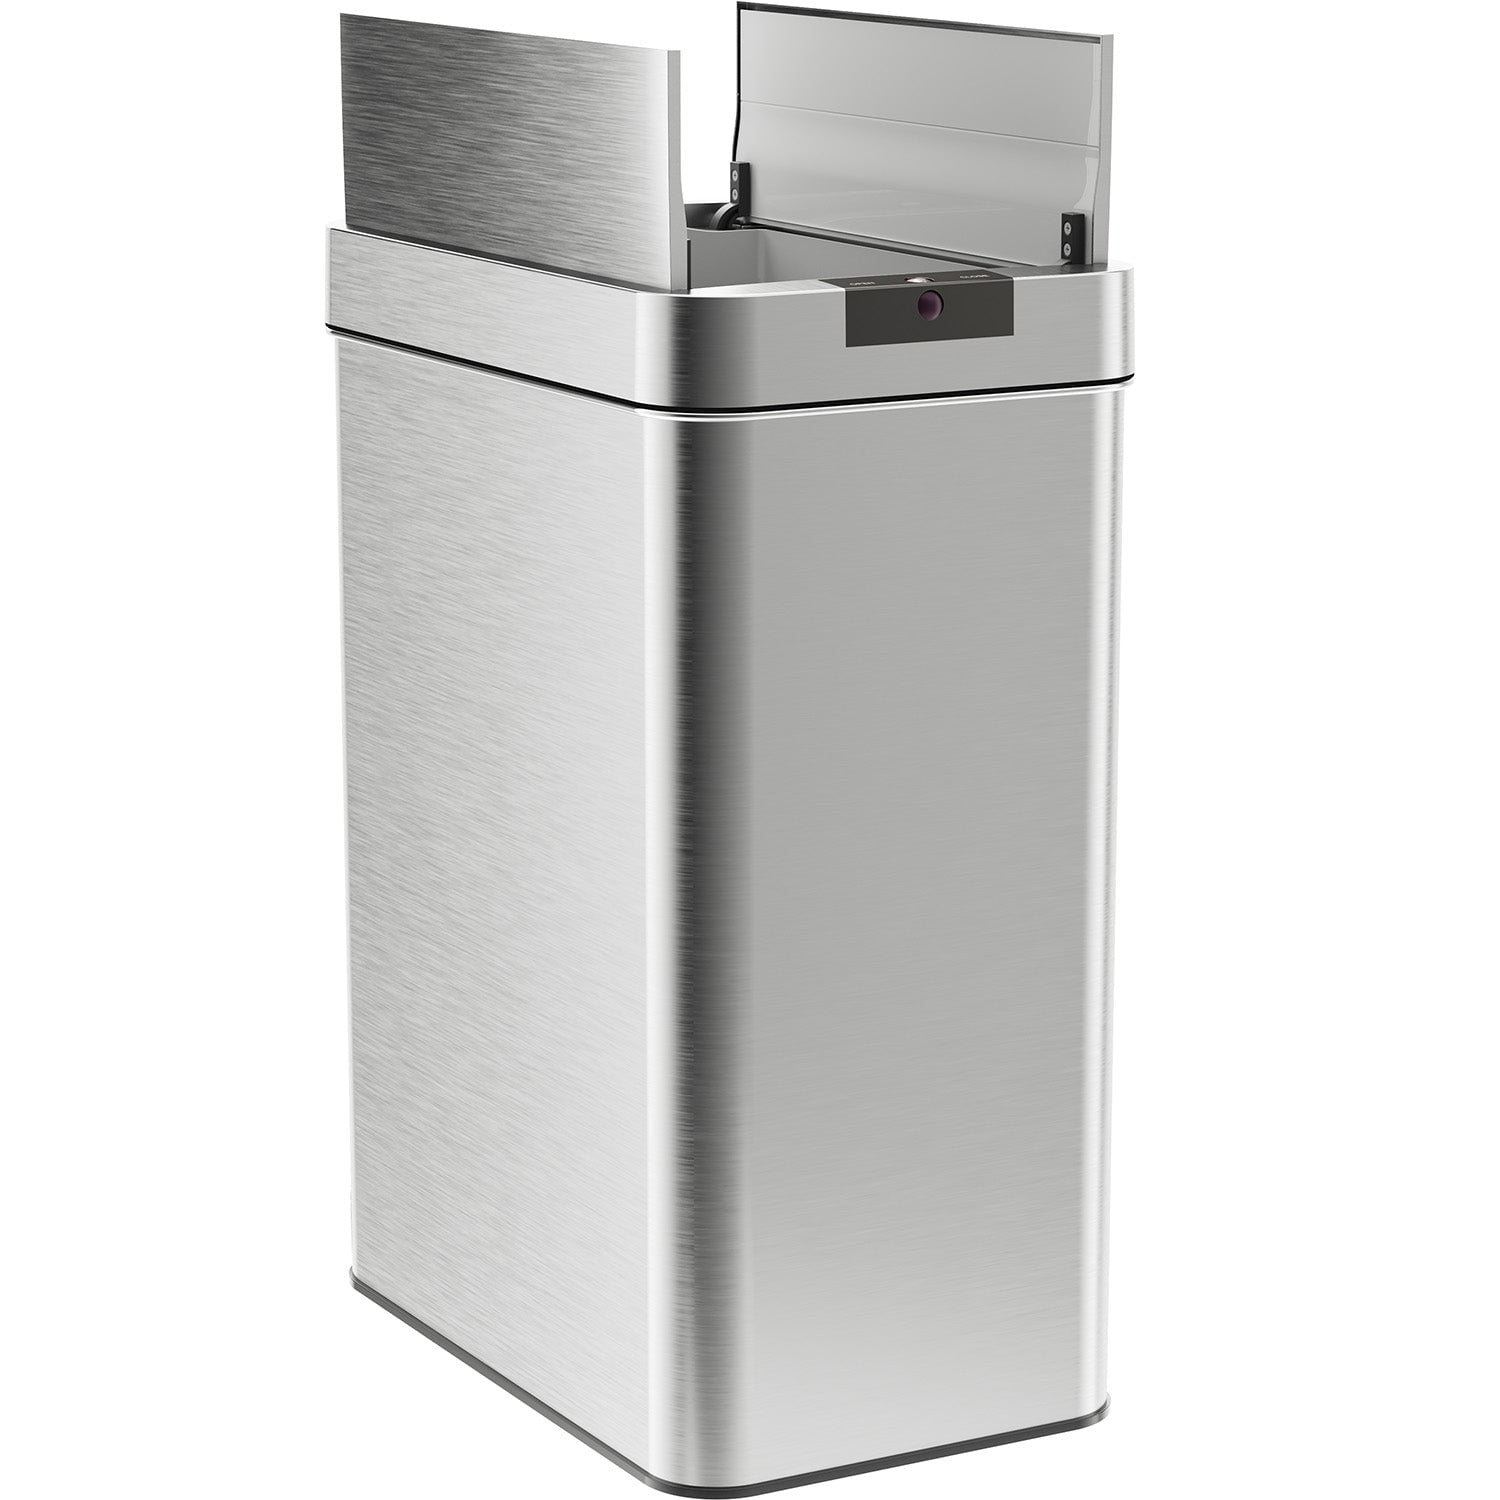 hOmeLabs 13 Gallon Automatic Trash Can for Kitchen - Stainless